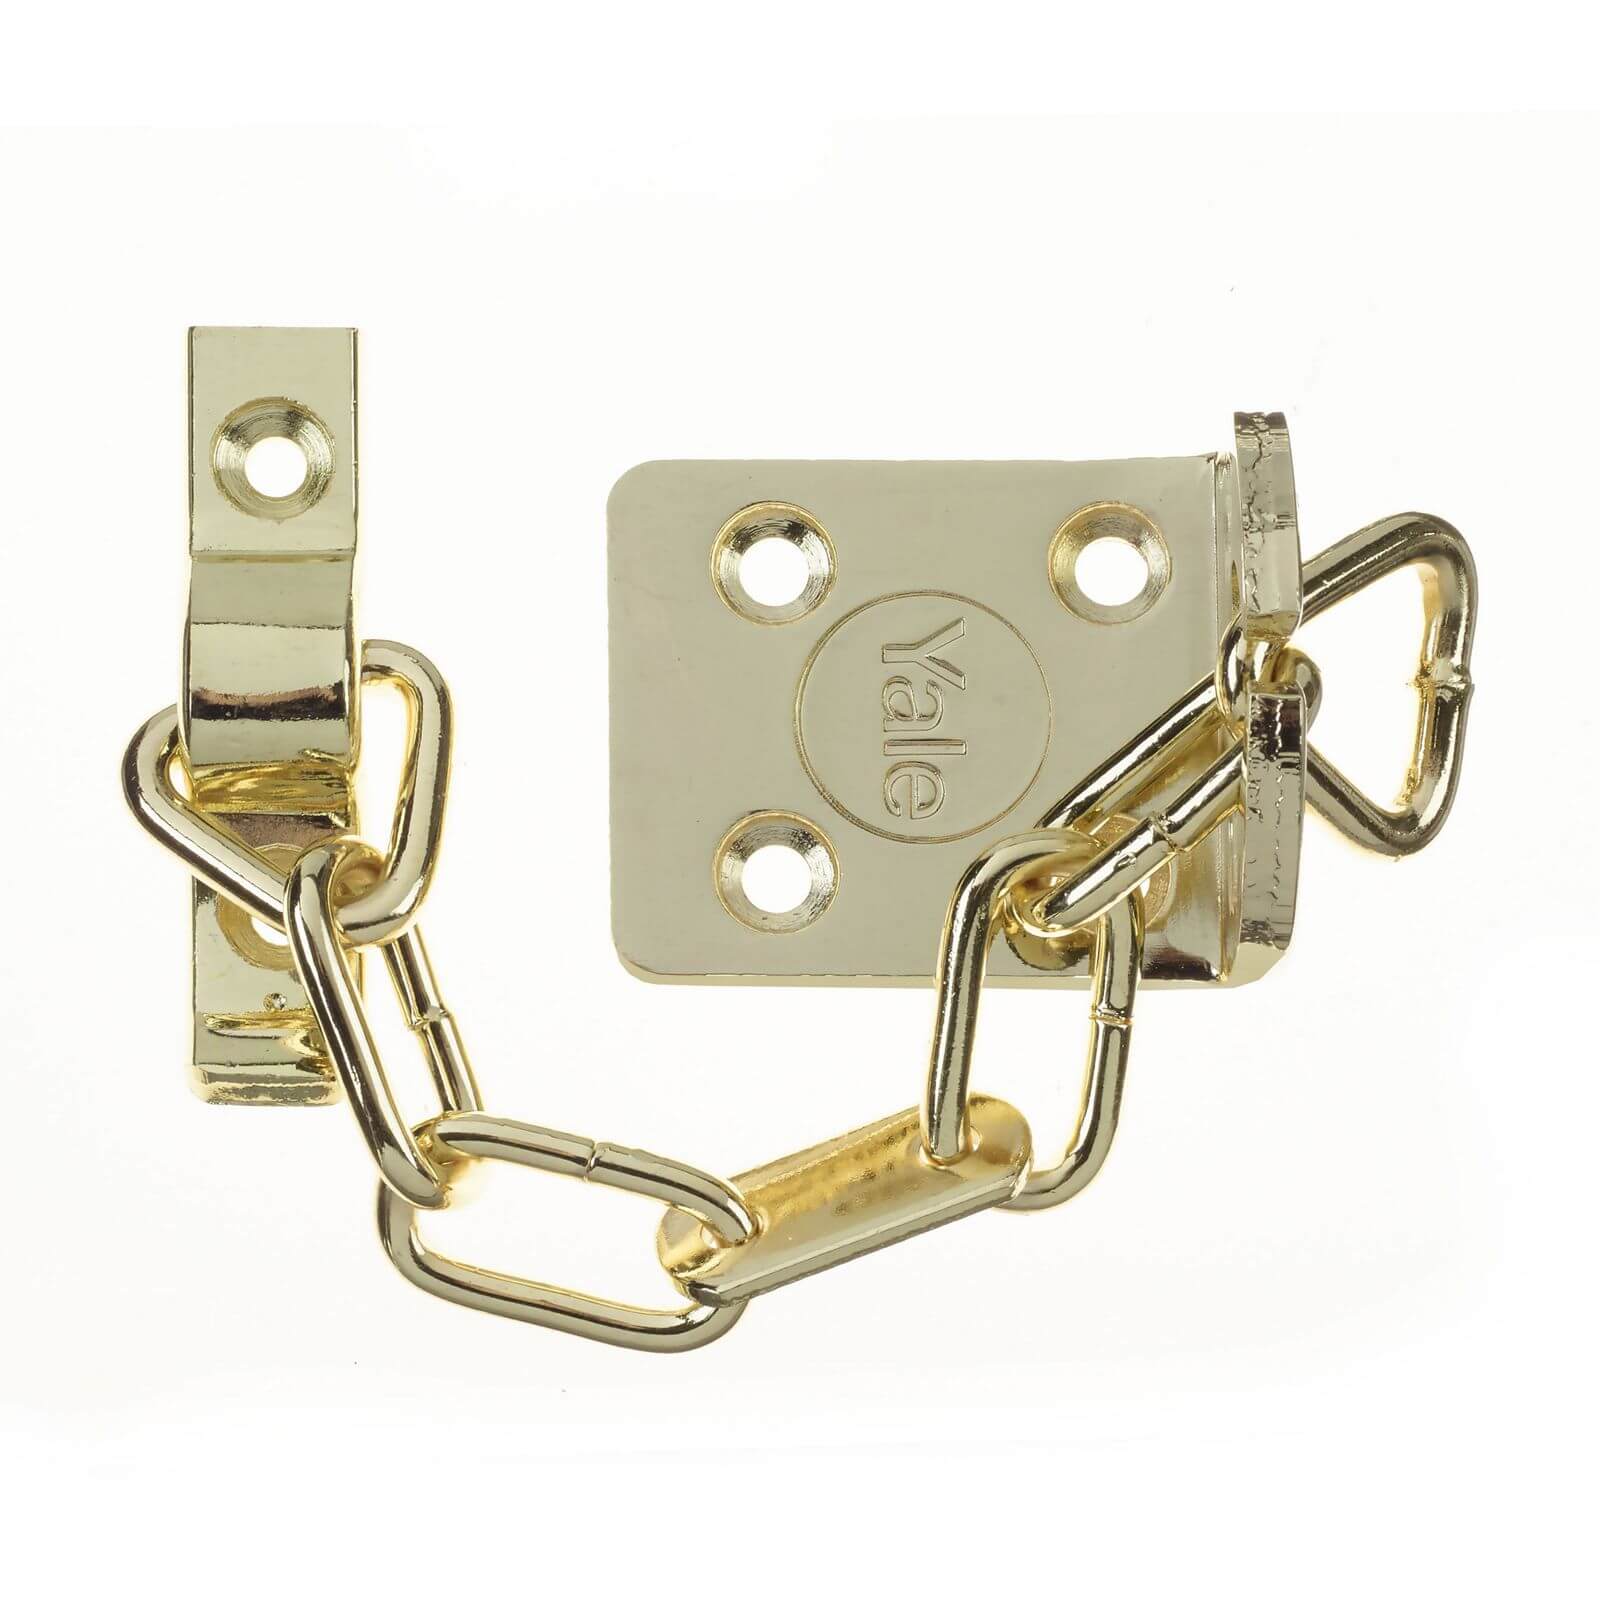 Yale WS6 TS003 rated Security Door Chain - Polished Brass